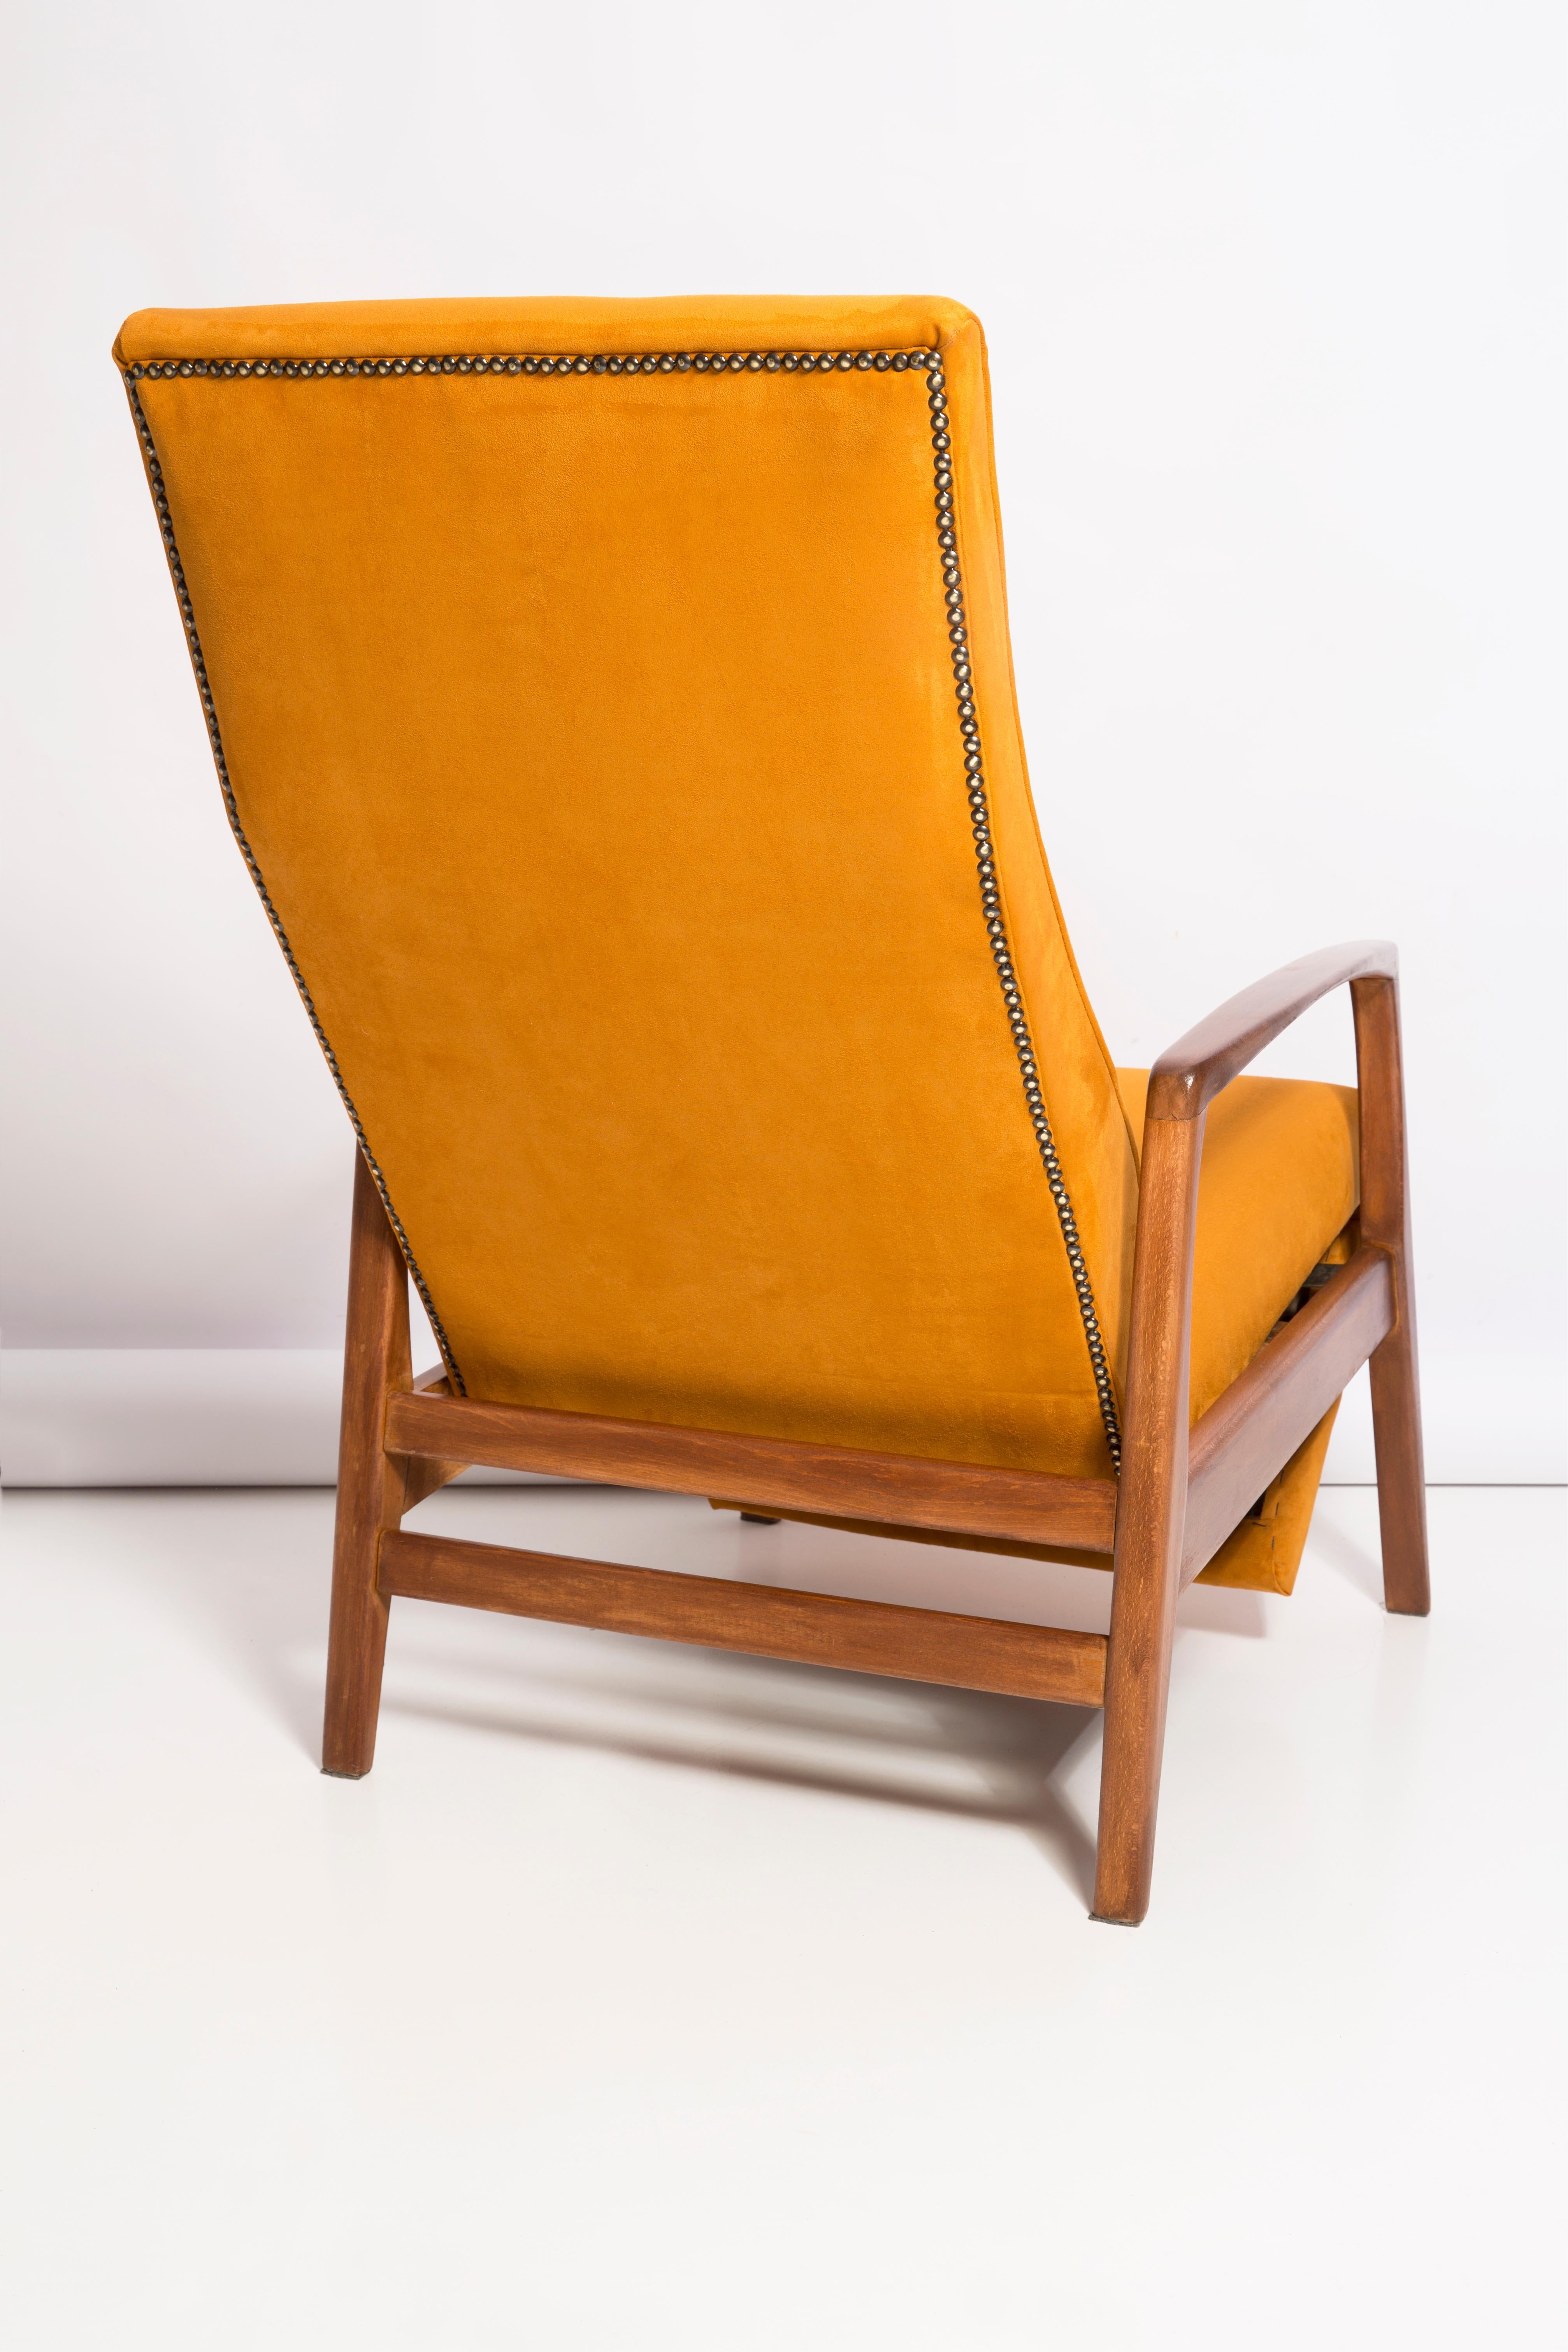 20th Century Yellow Fold-Out Armchair, Europe, 1960s For Sale 9